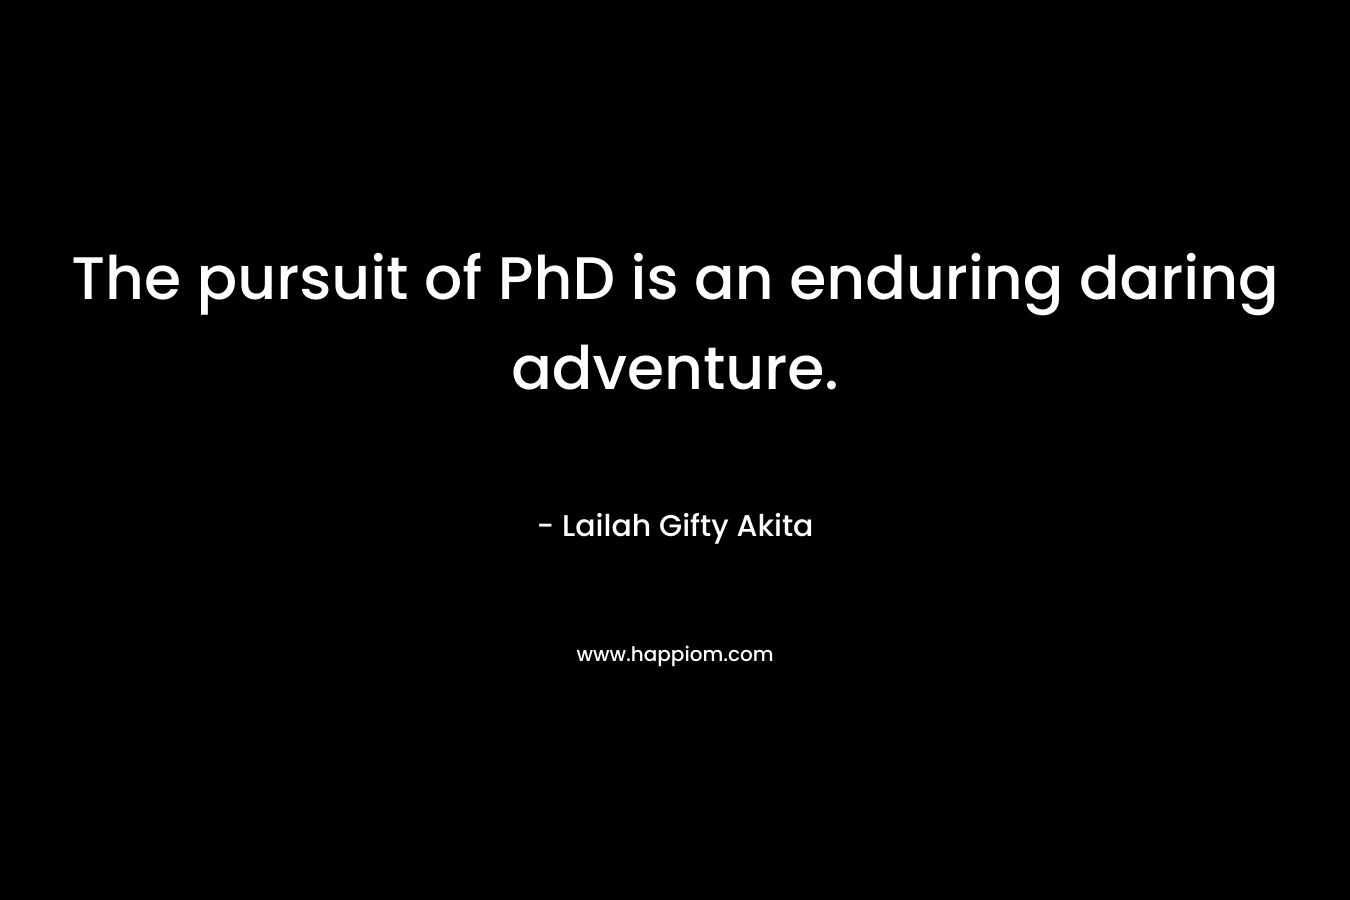 The pursuit of PhD is an enduring daring adventure.